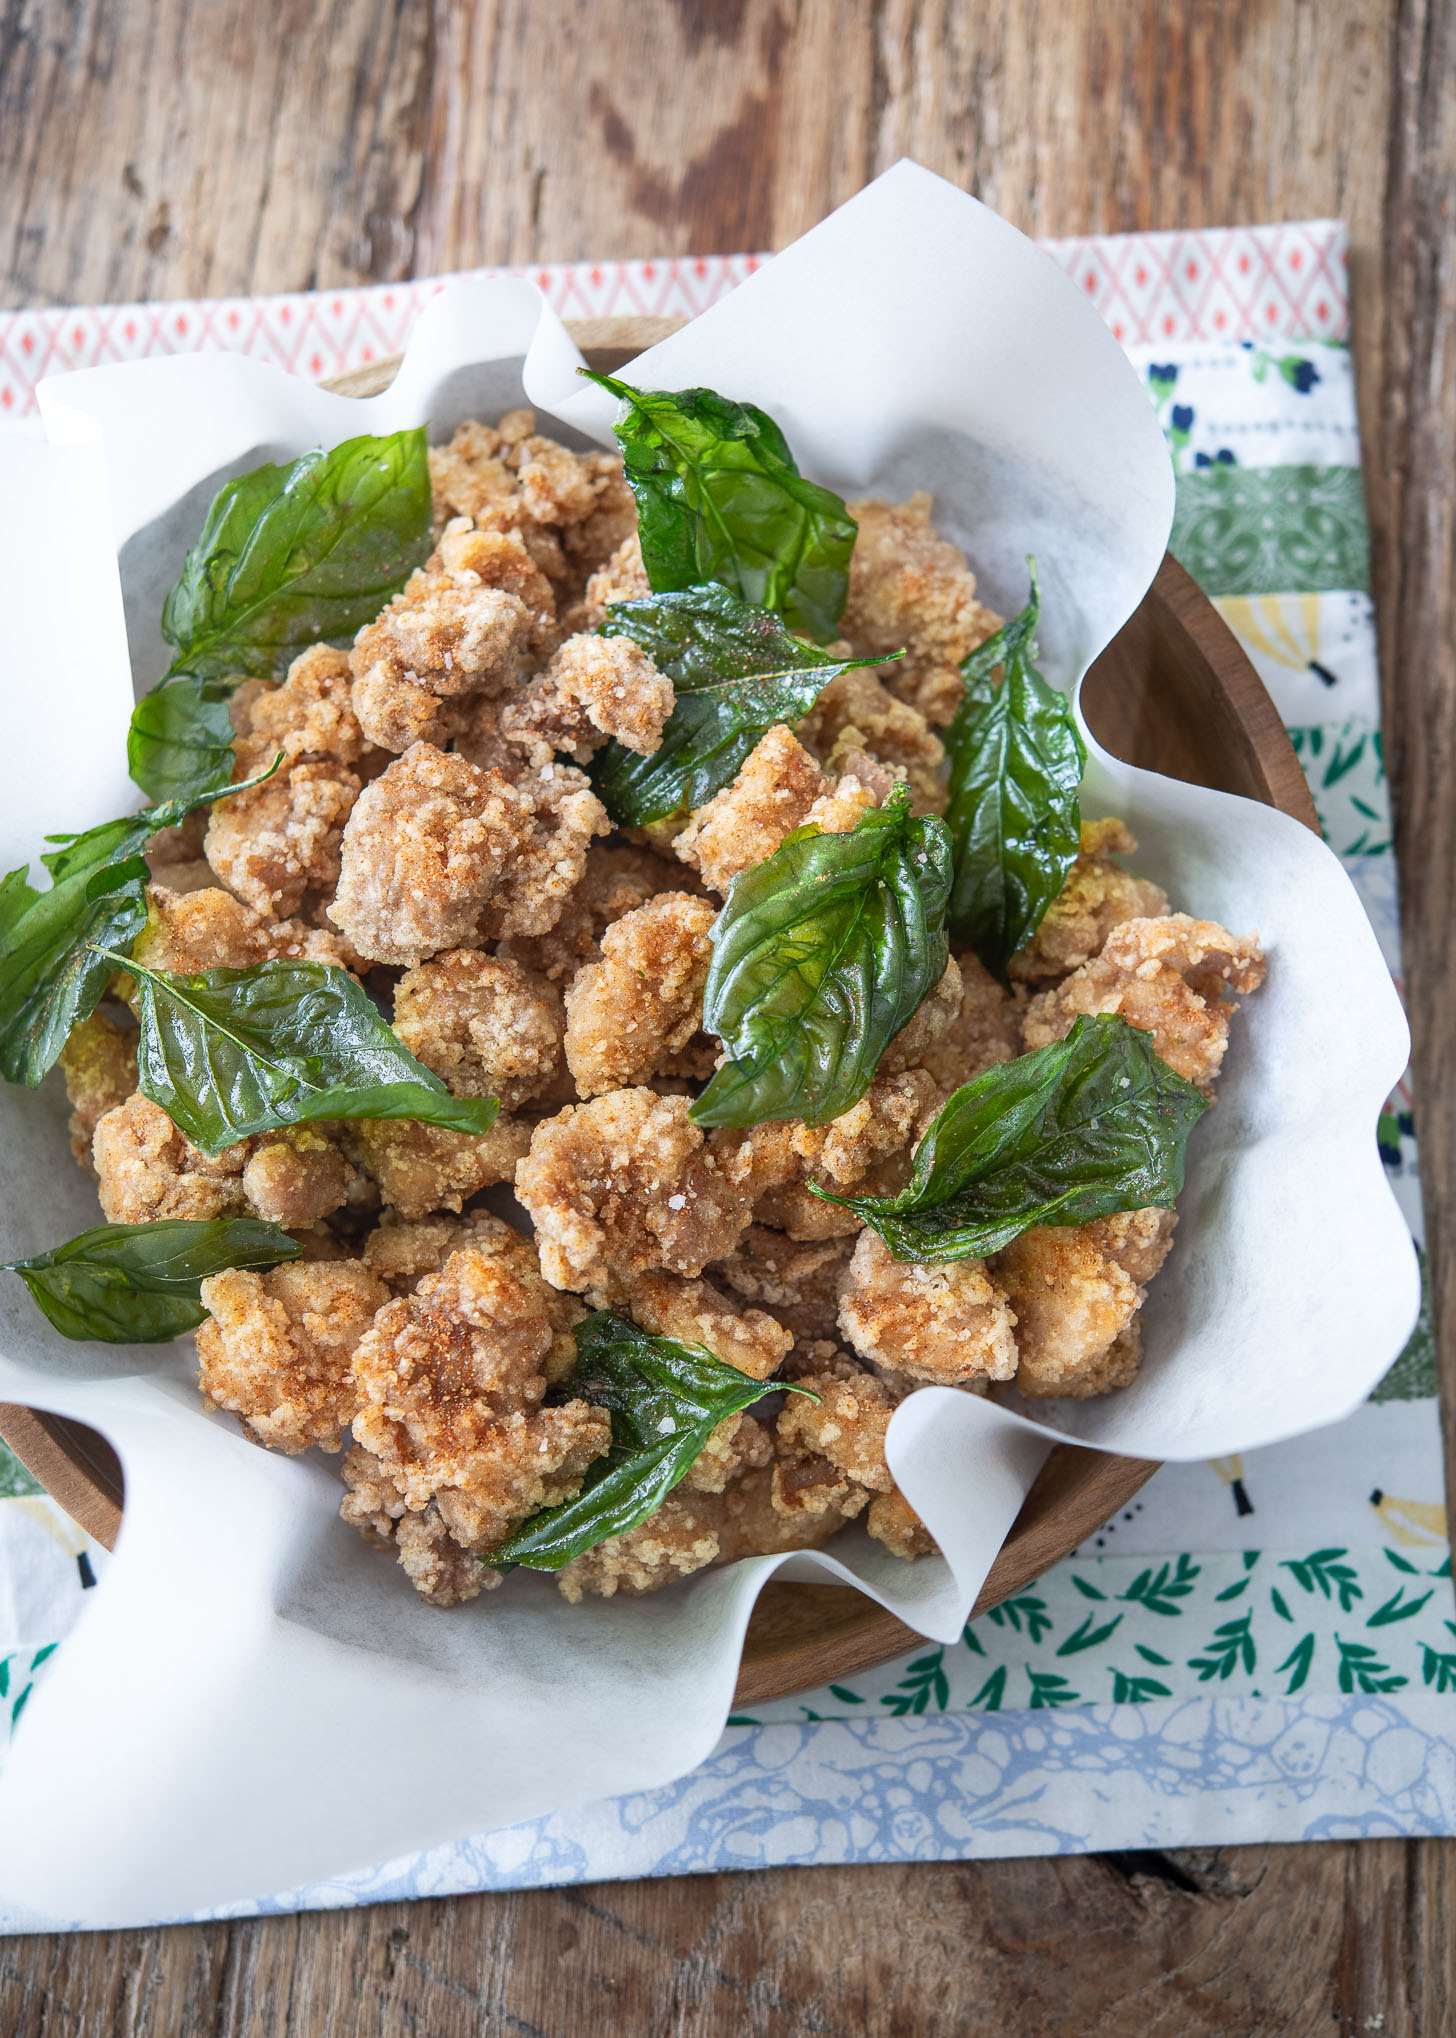 Crunchy Taiwanese popcorn chicken is garnished with fried basil in a container.